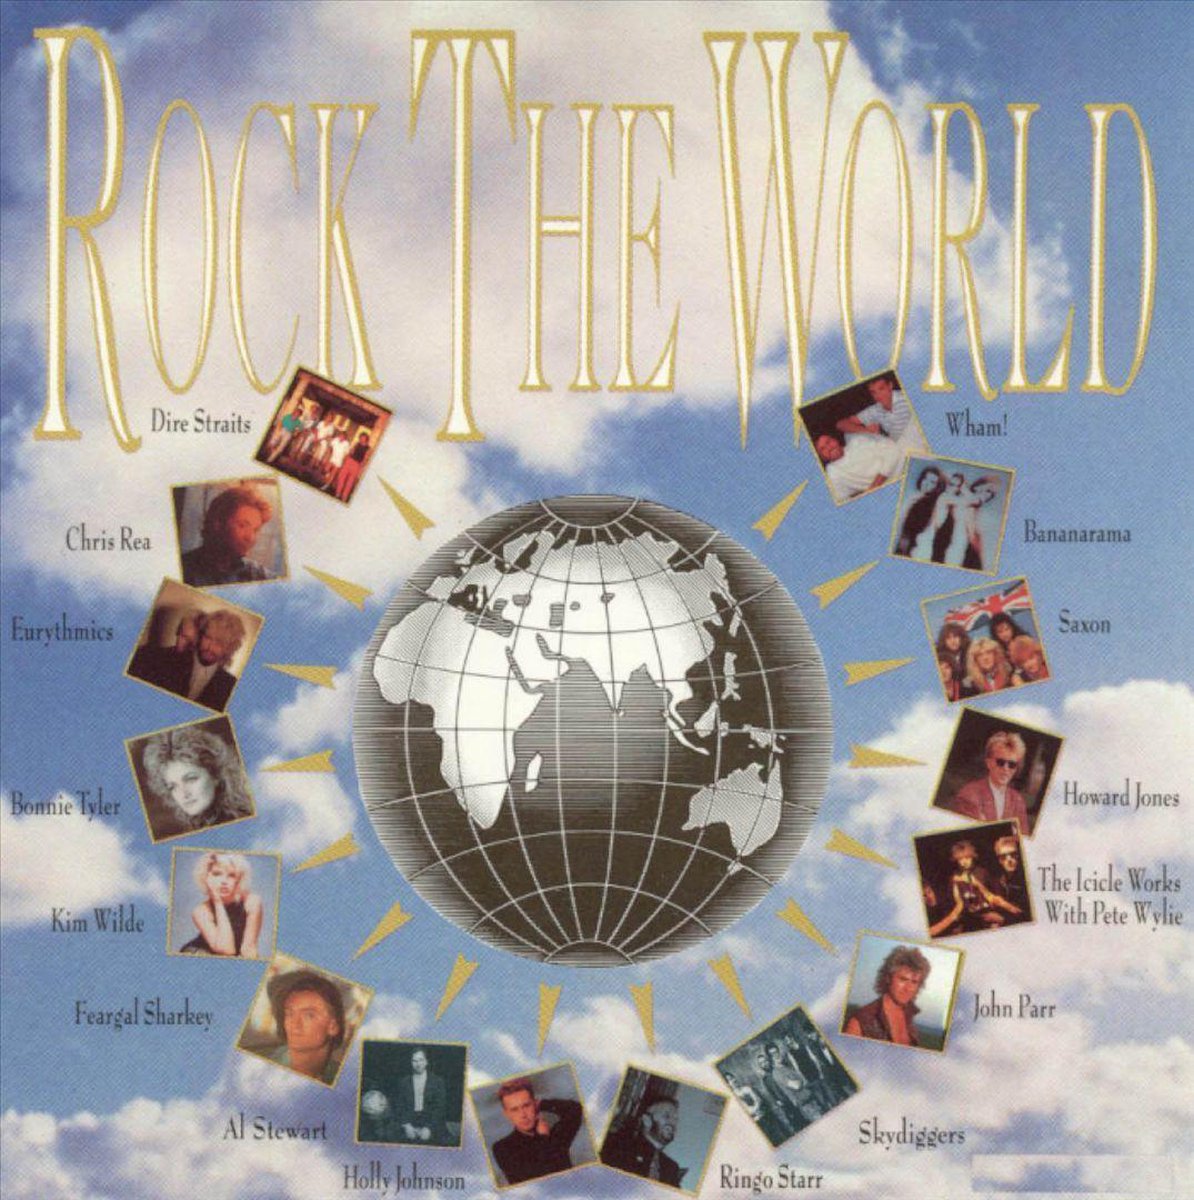 Rock the World [Enigma] - various artists